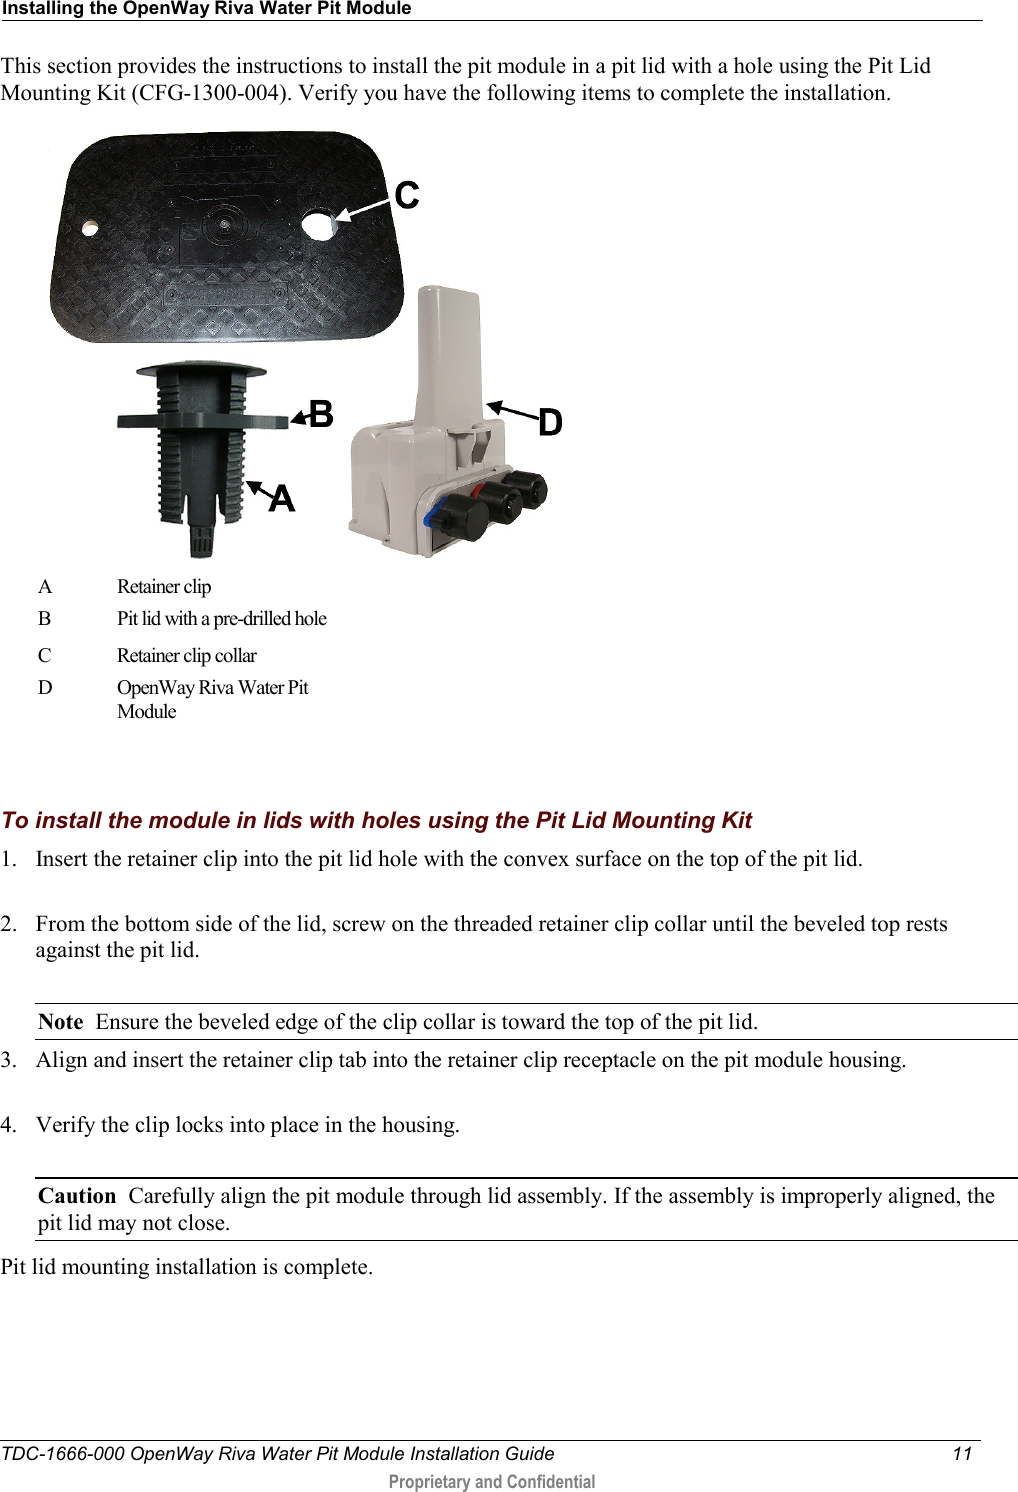 Installing the OpenWay Riva Water Pit Module  TDC-1666-000 OpenWay Riva Water Pit Module Installation Guide 11   Proprietary and Confidential  This section provides the instructions to install the pit module in a pit lid with a hole using the Pit Lid Mounting Kit (CFG-1300-004). Verify you have the following items to complete the installation.  A  Retainer clip  B  Pit lid with a pre-drilled hole C  Retainer clip collar D  OpenWay Riva Water Pit Module   To install the module in lids with holes using the Pit Lid Mounting Kit 1. Insert the retainer clip into the pit lid hole with the convex surface on the top of the pit lid.  2. From the bottom side of the lid, screw on the threaded retainer clip collar until the beveled top rests against the pit lid.    Note  Ensure the beveled edge of the clip collar is toward the top of the pit lid. 3. Align and insert the retainer clip tab into the retainer clip receptacle on the pit module housing.   4. Verify the clip locks into place in the housing.  Caution  Carefully align the pit module through lid assembly. If the assembly is improperly aligned, the pit lid may not close.   Pit lid mounting installation is complete.  